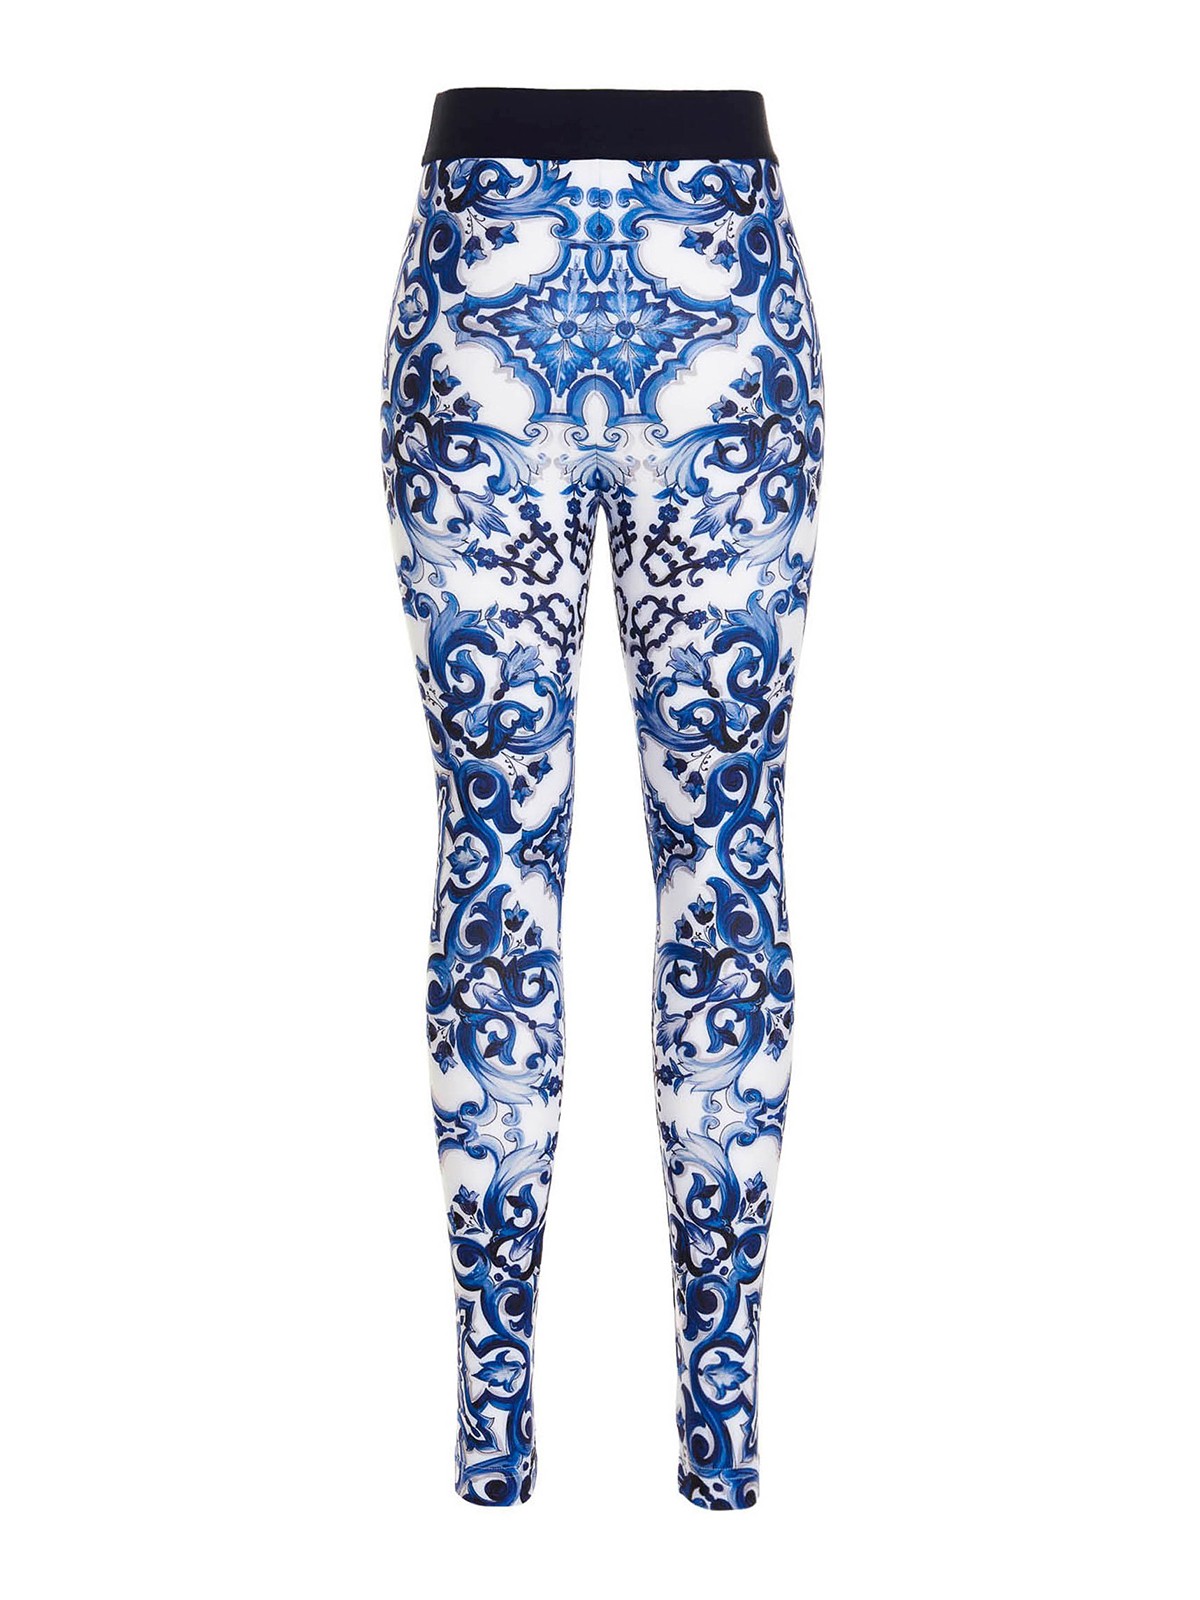 Buy Women's Sustainable Printed Cotton Leggings Online | Centrepoint Oman